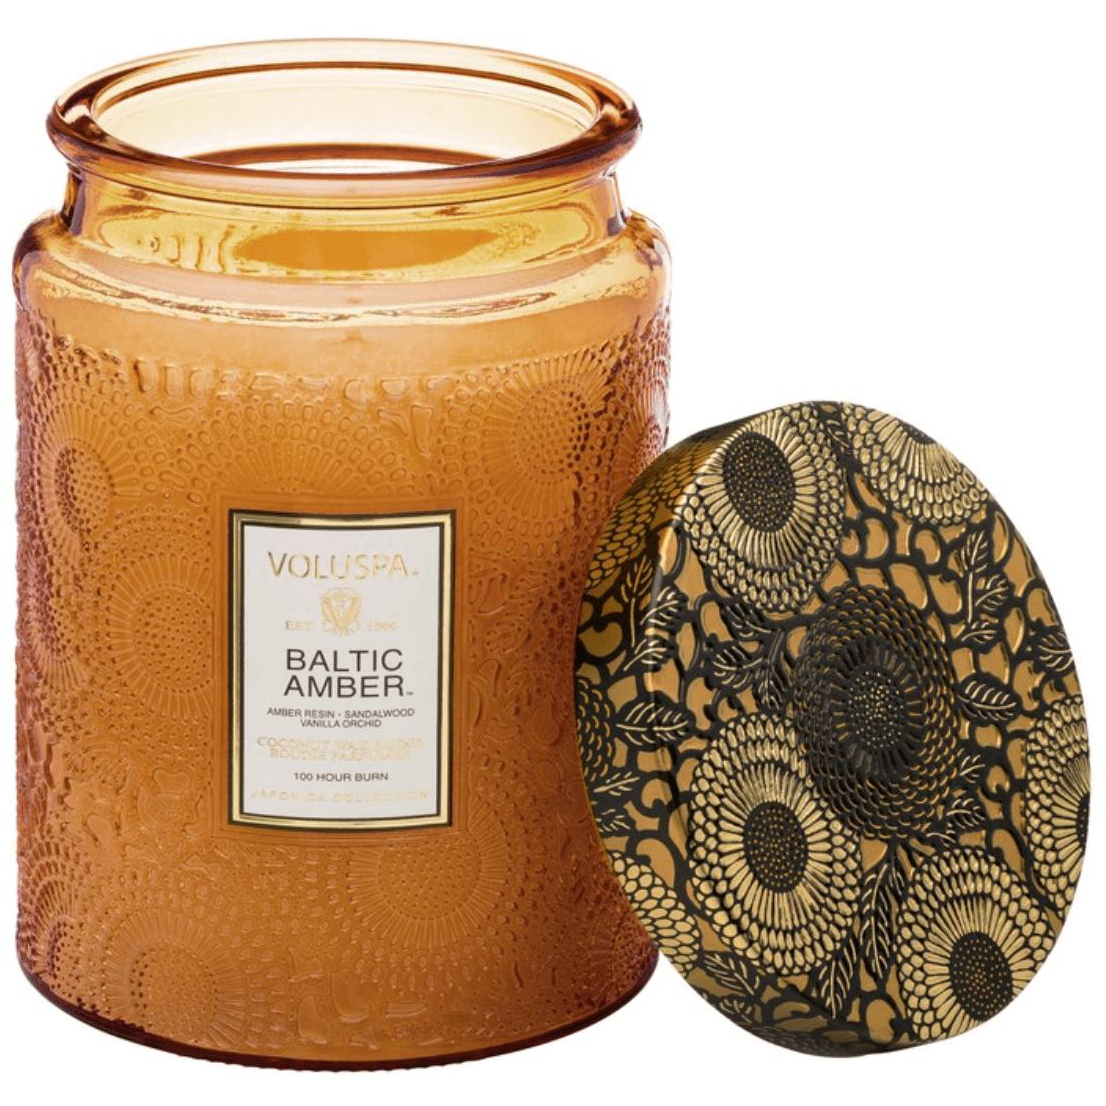 Volupsa Large Embossed Glass Candle - Baltic Amber Poured in California - Zinnias Gift Boutique